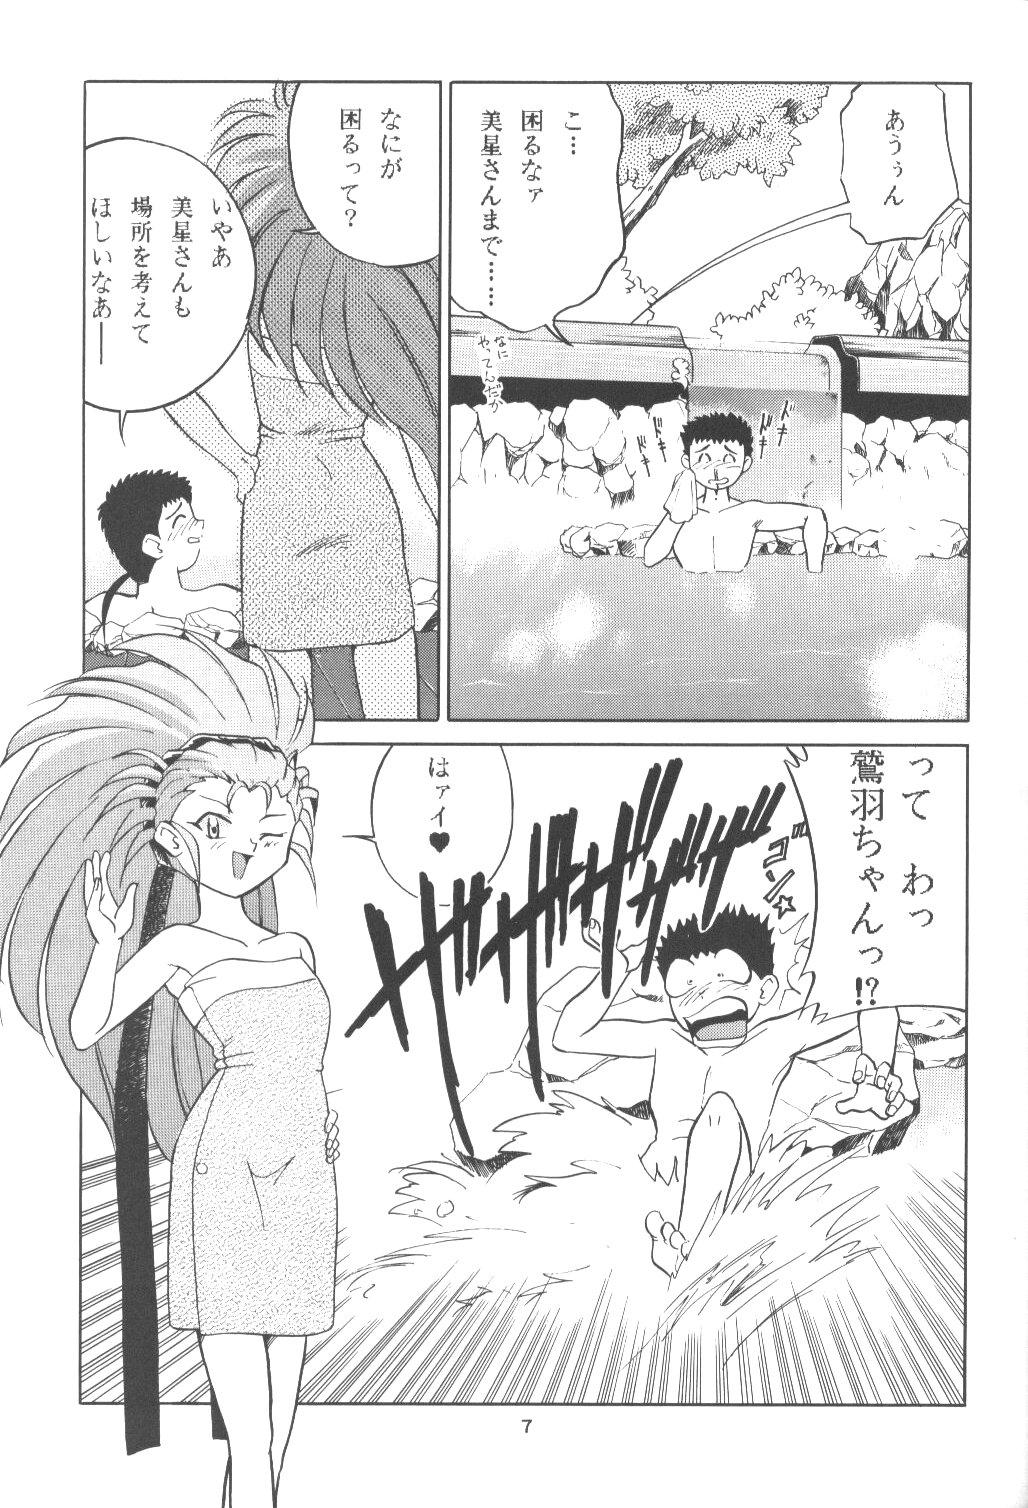 Licking Pussy Gelbe Sonne 9 - Tenchi muyo Guys - Page 6